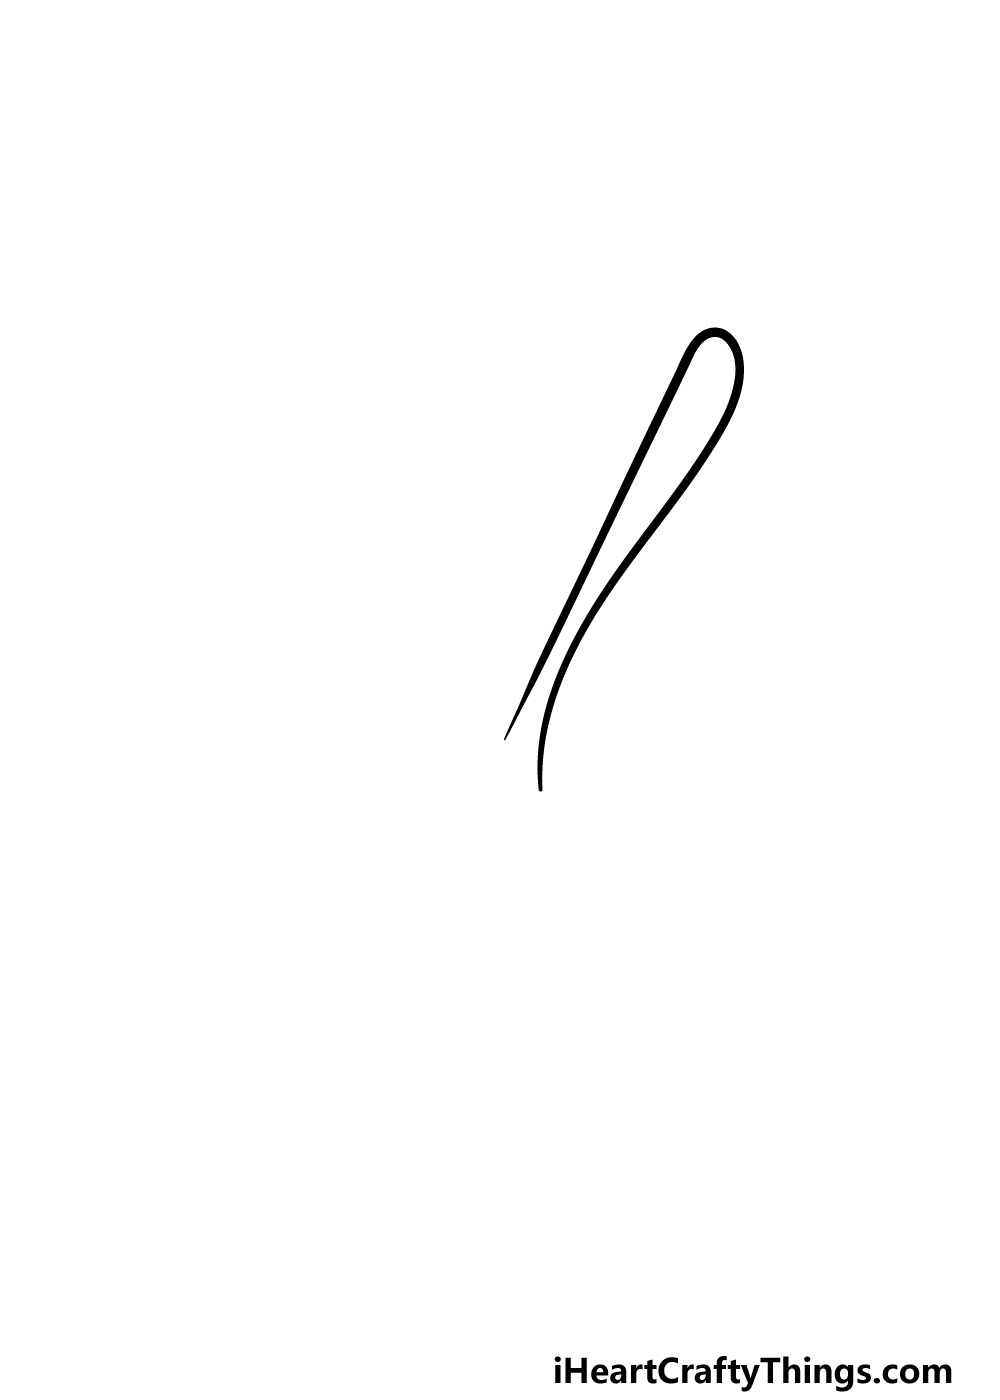 how to draw a fork step 1